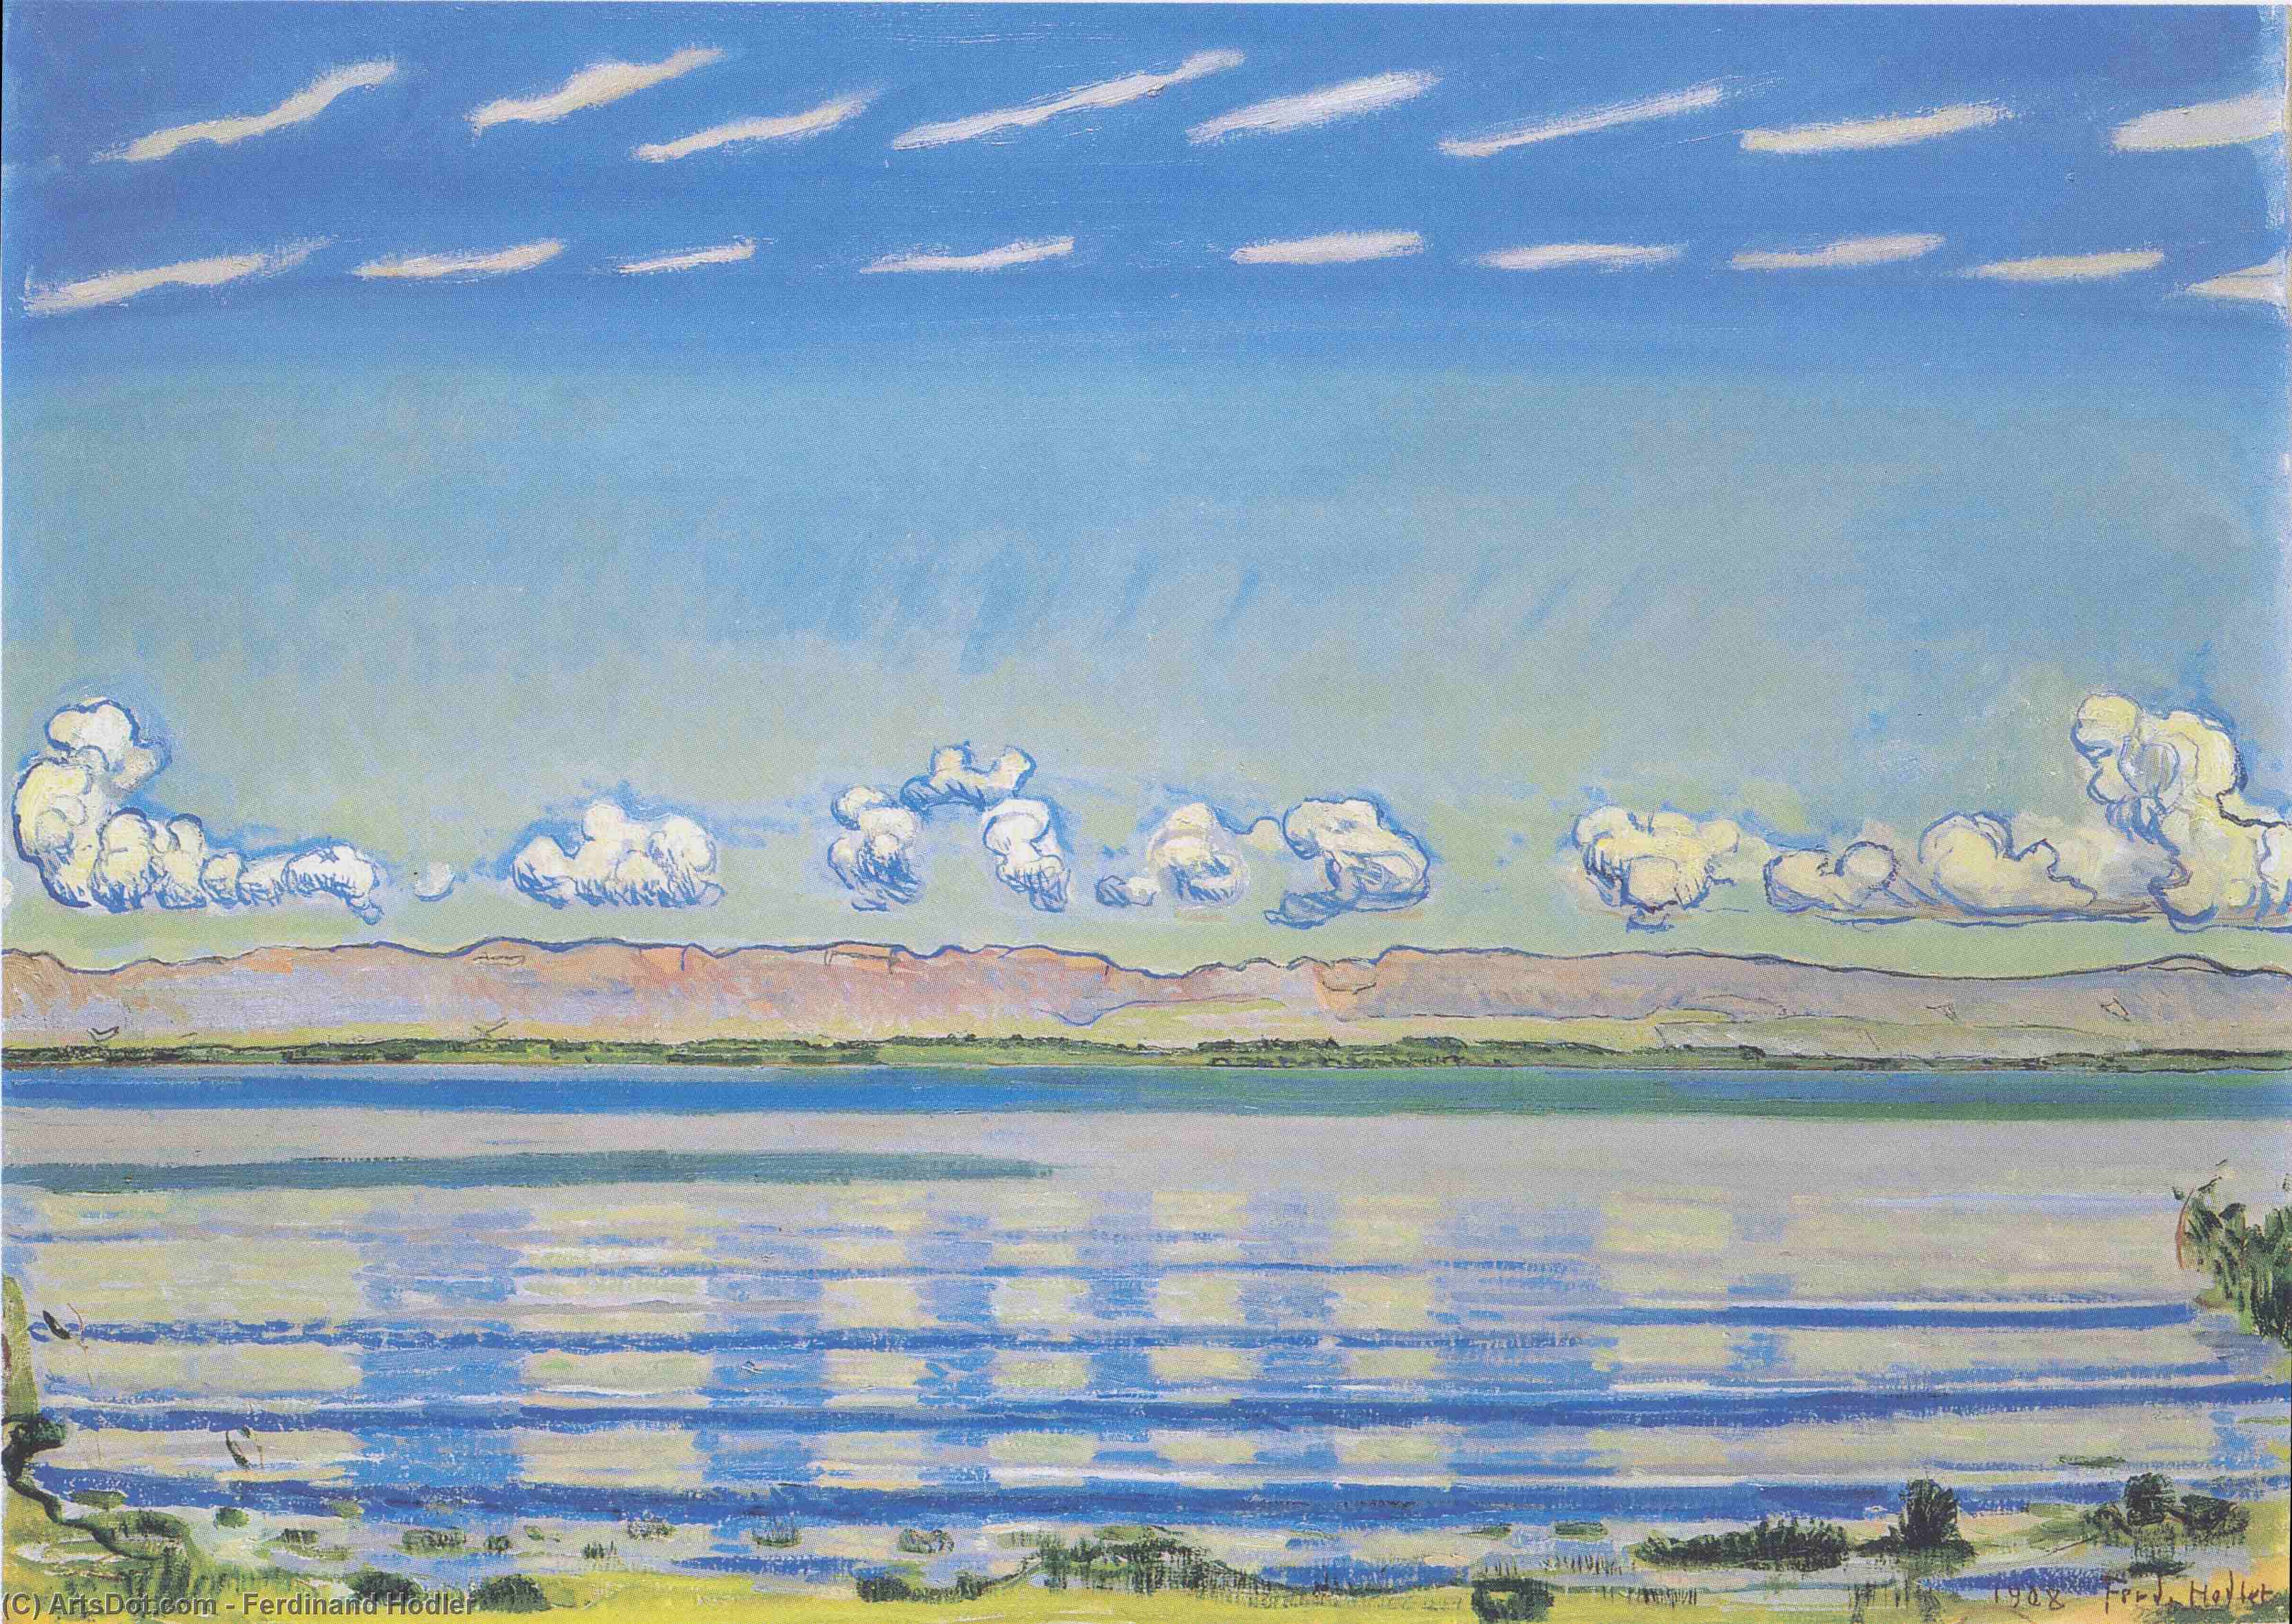 WikiOO.org - Encyclopedia of Fine Arts - Maalaus, taideteos Ferdinand Hodler - On Lake Geneva (also known as Landscape with Rhythmic Shapes)